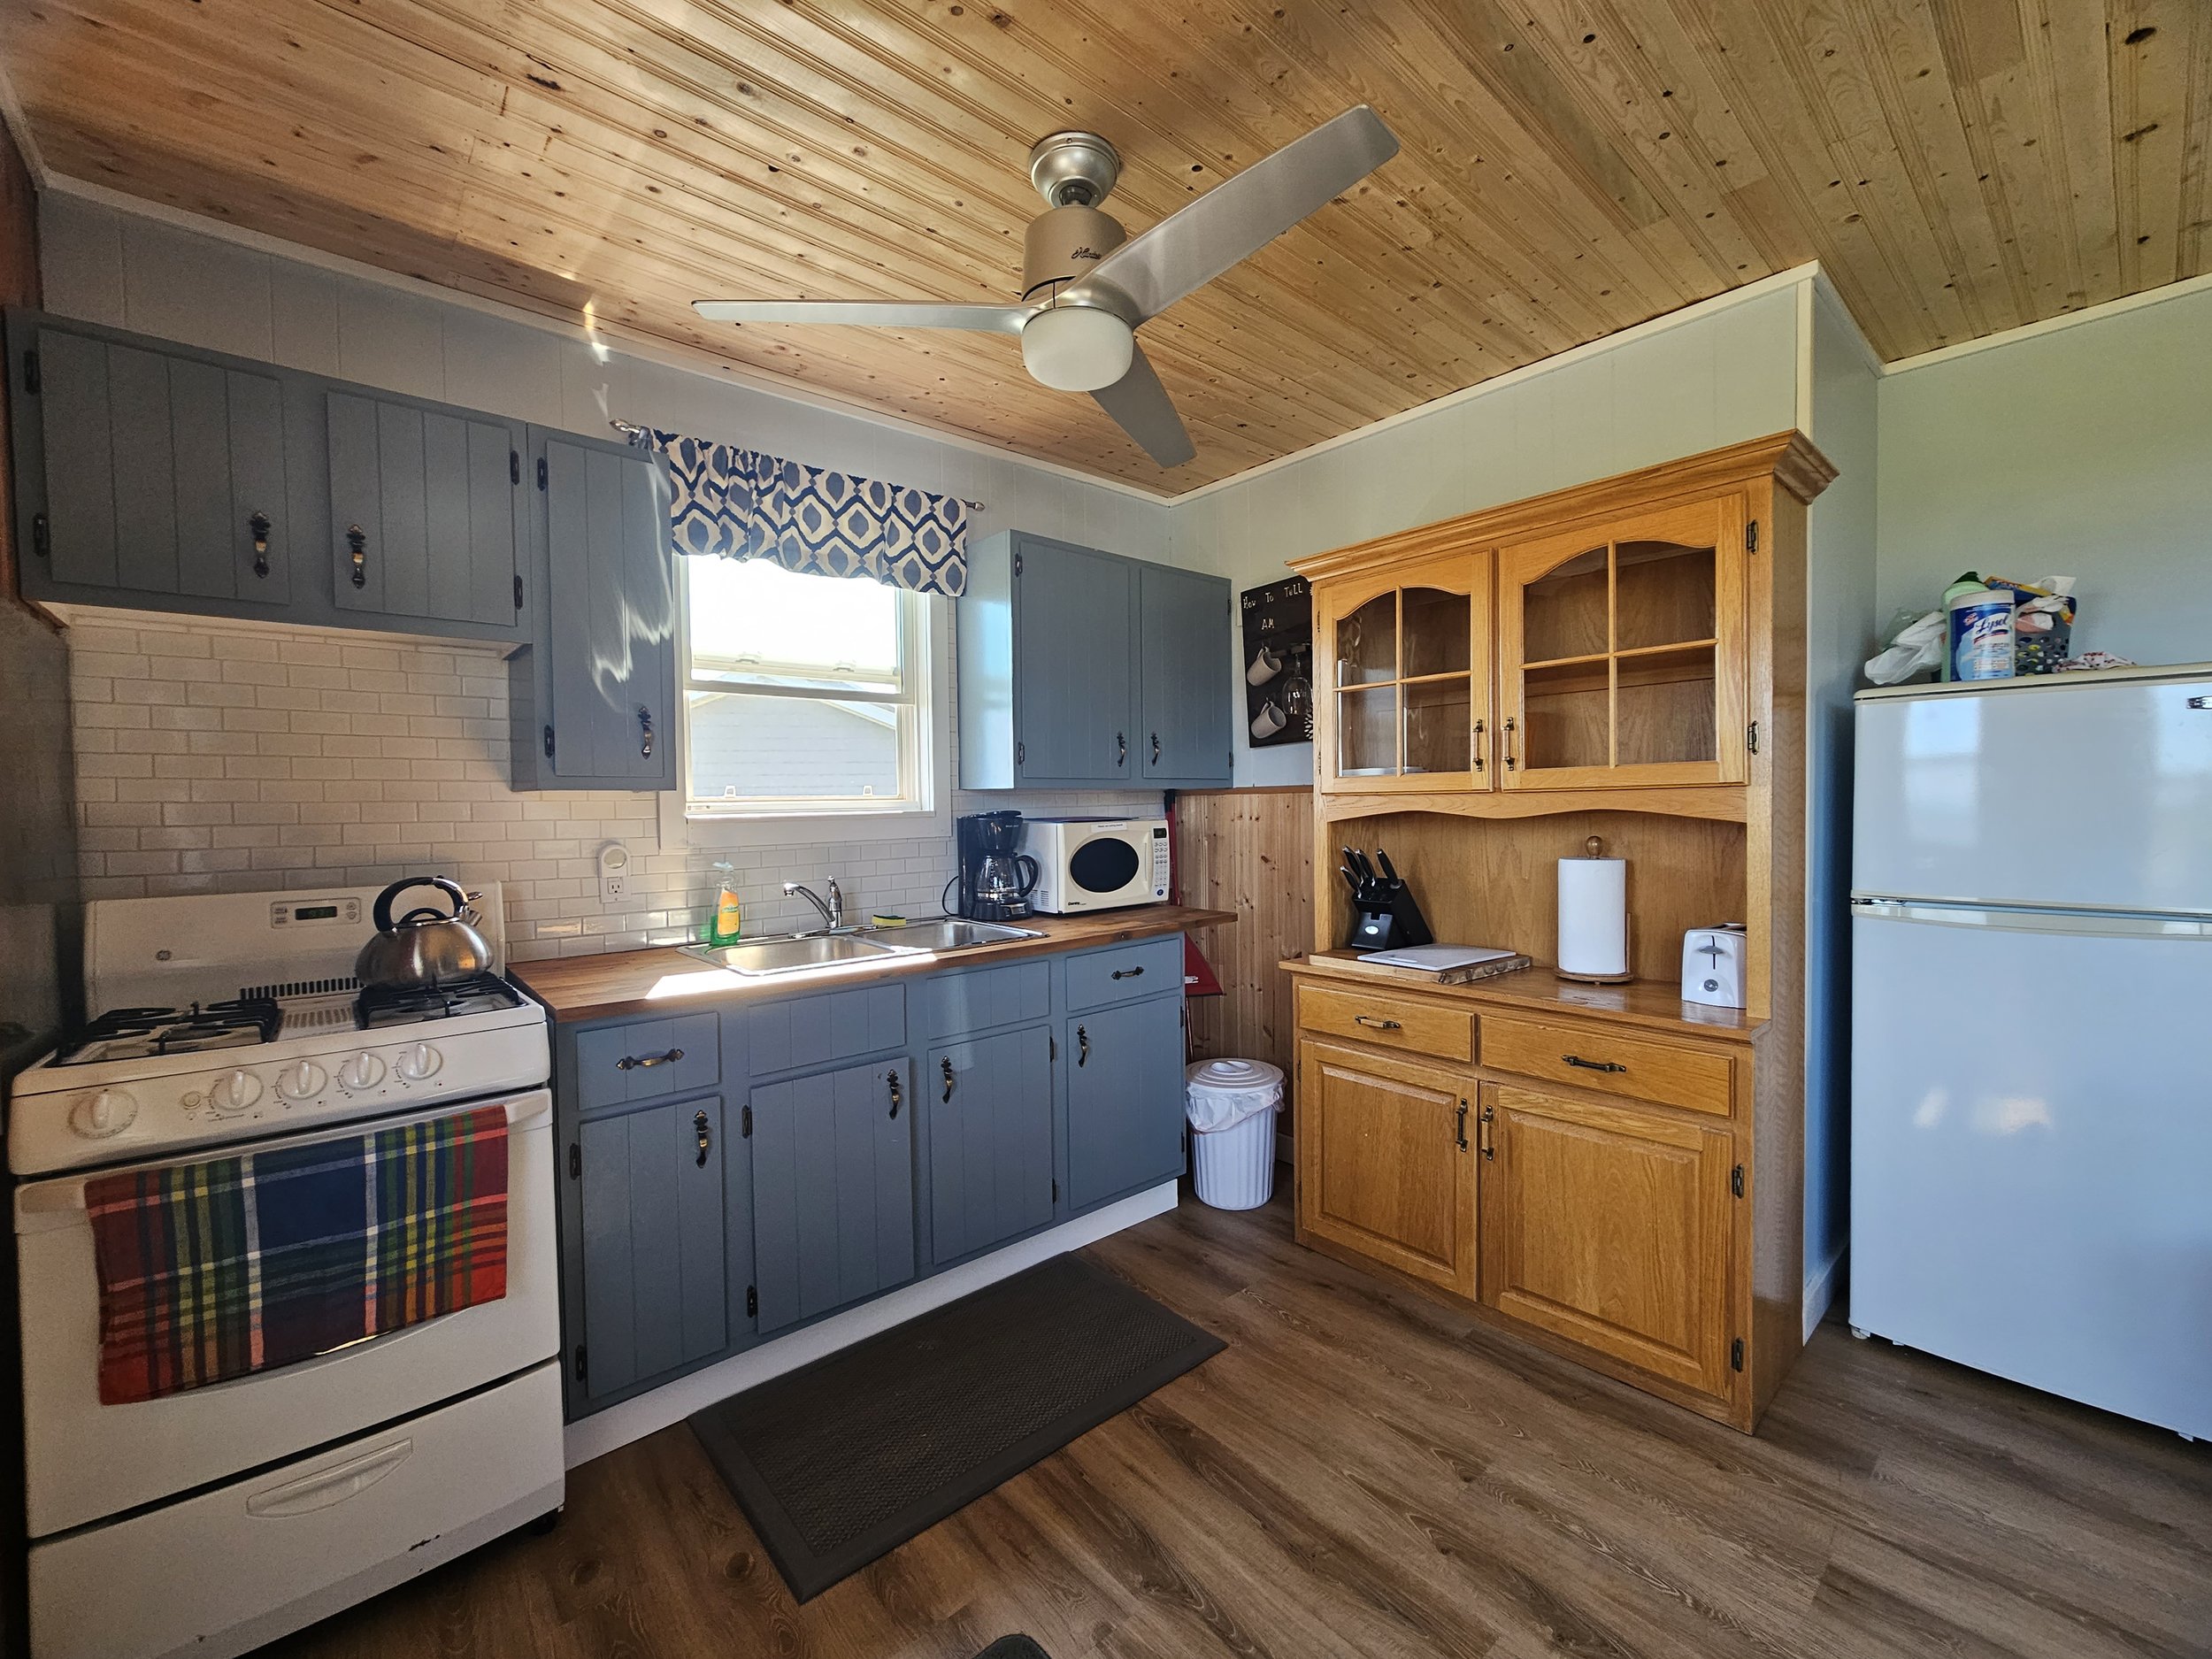 Kitchen-Cottage - propane stove, new bamboo countertops in 2020.jpg